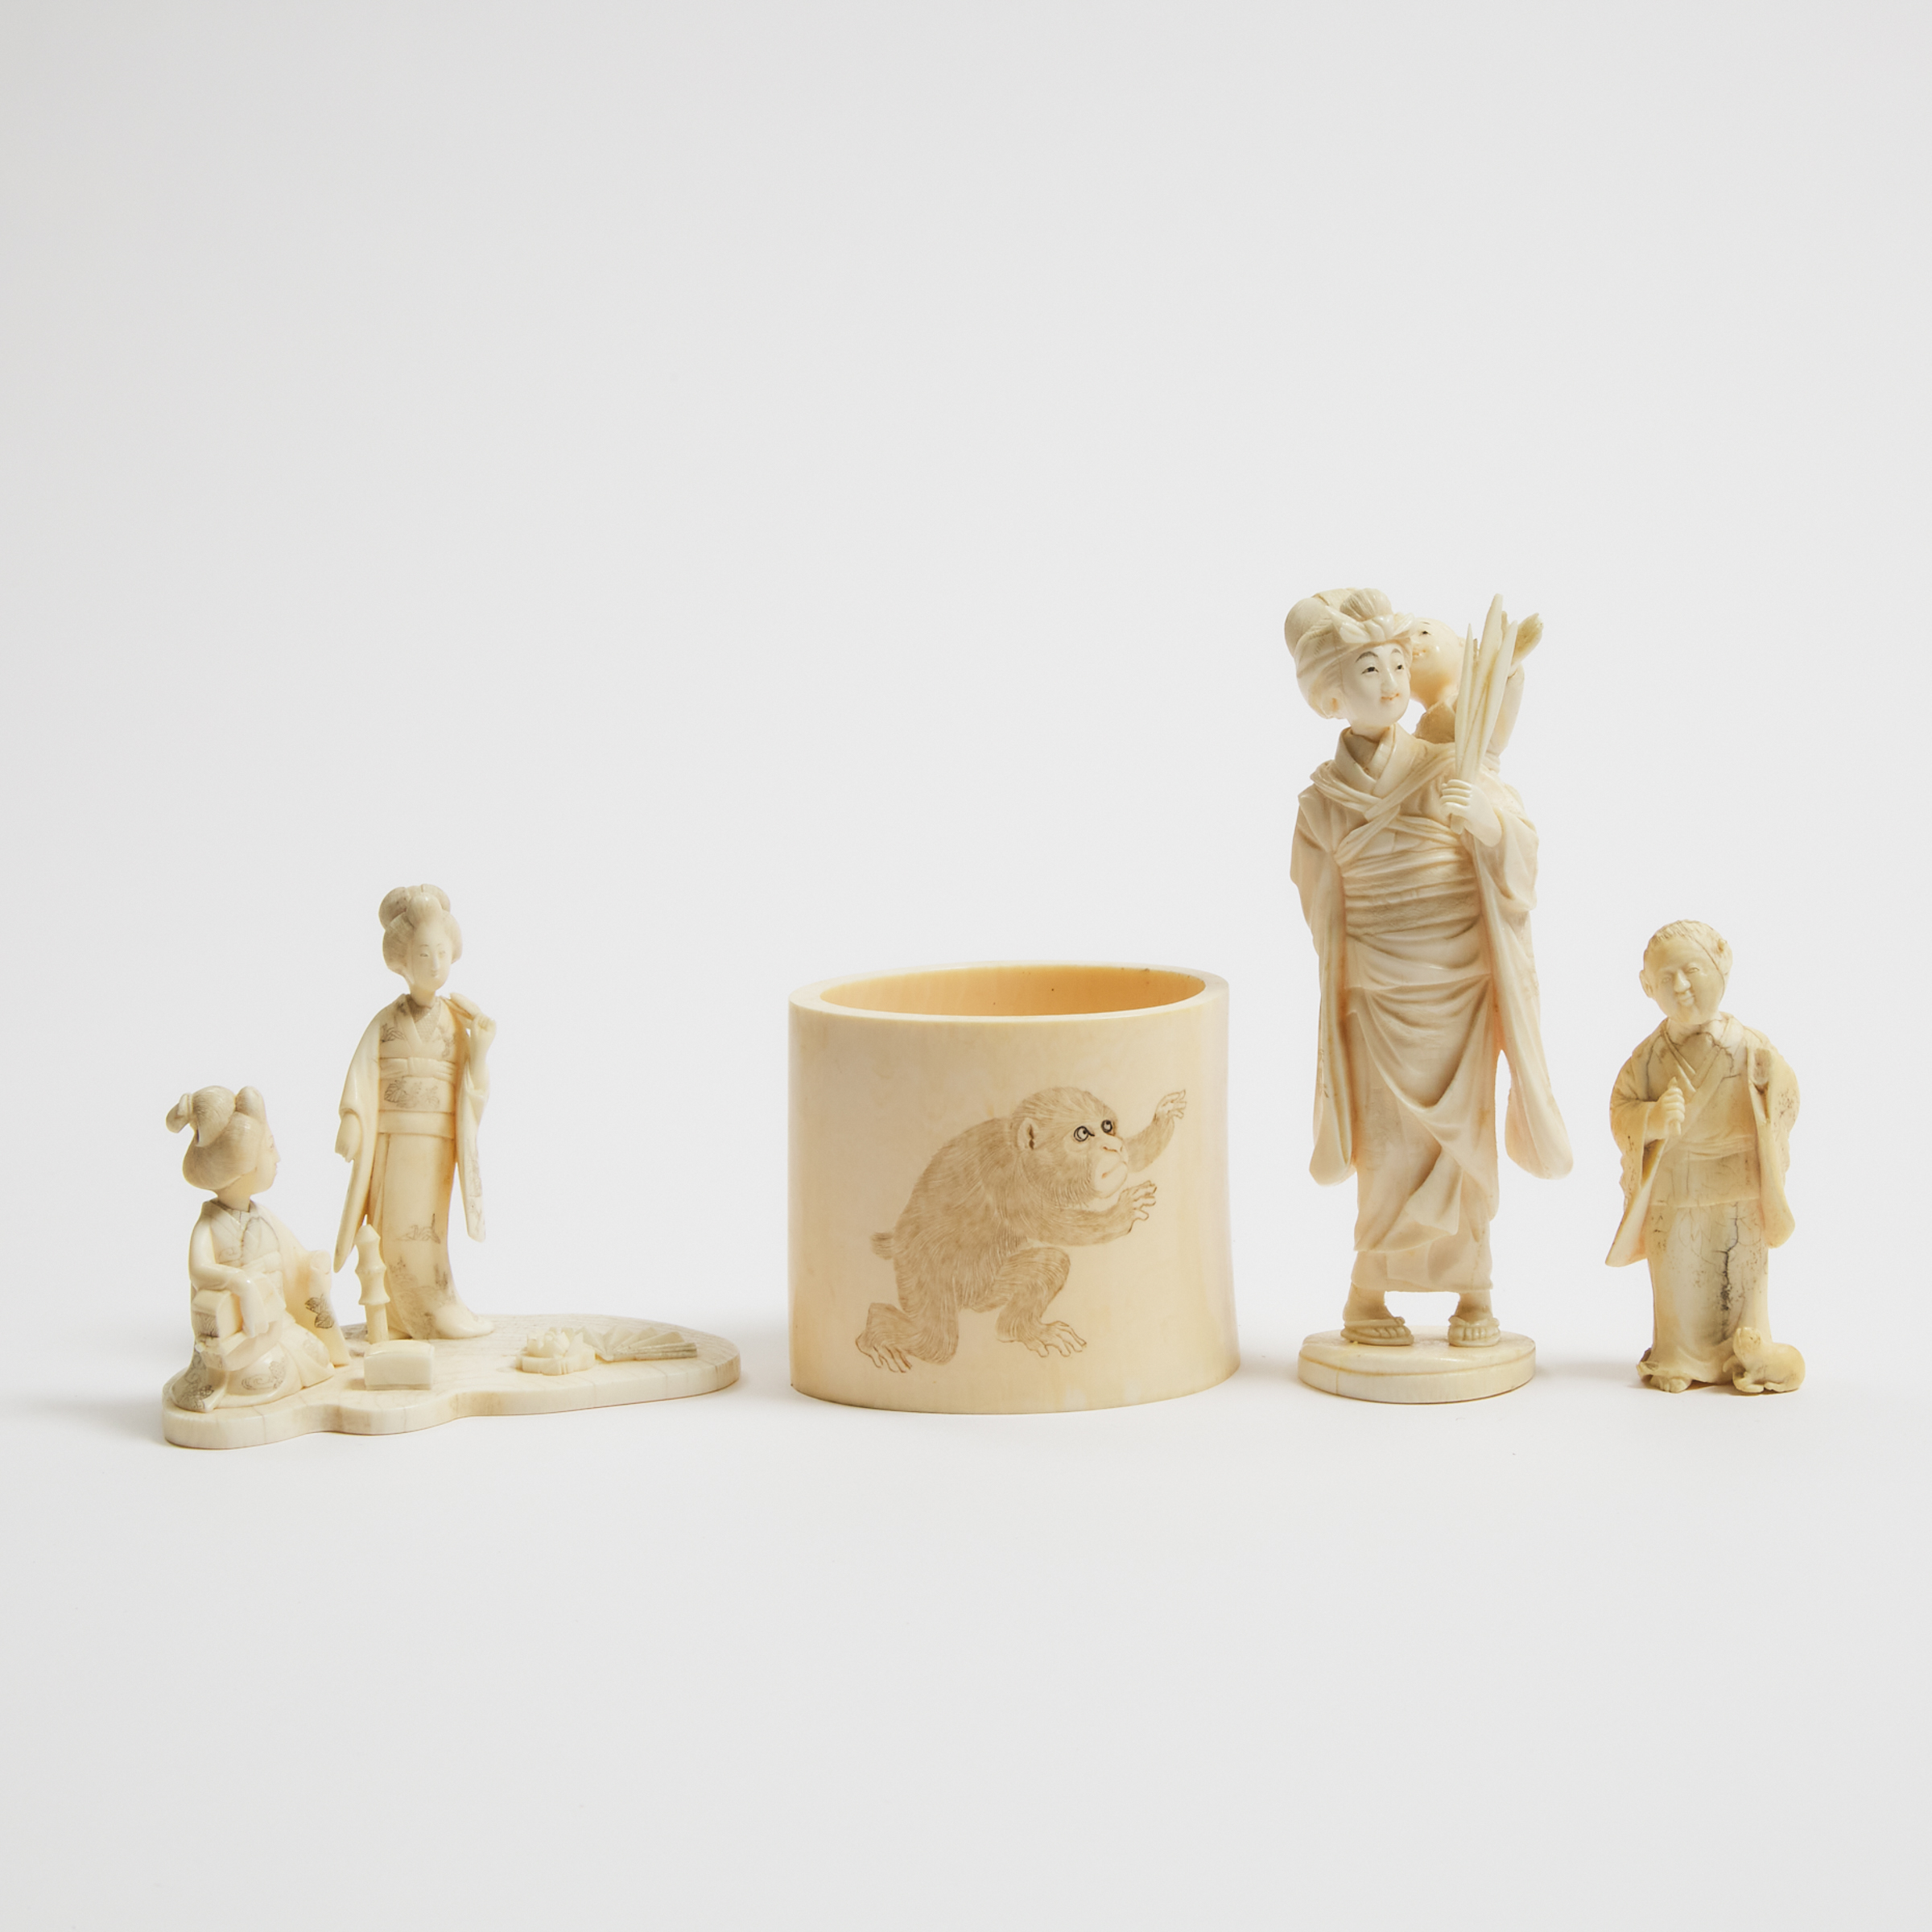 Four Japanese Ivory Carvings, Meiji Period (1868-1912)